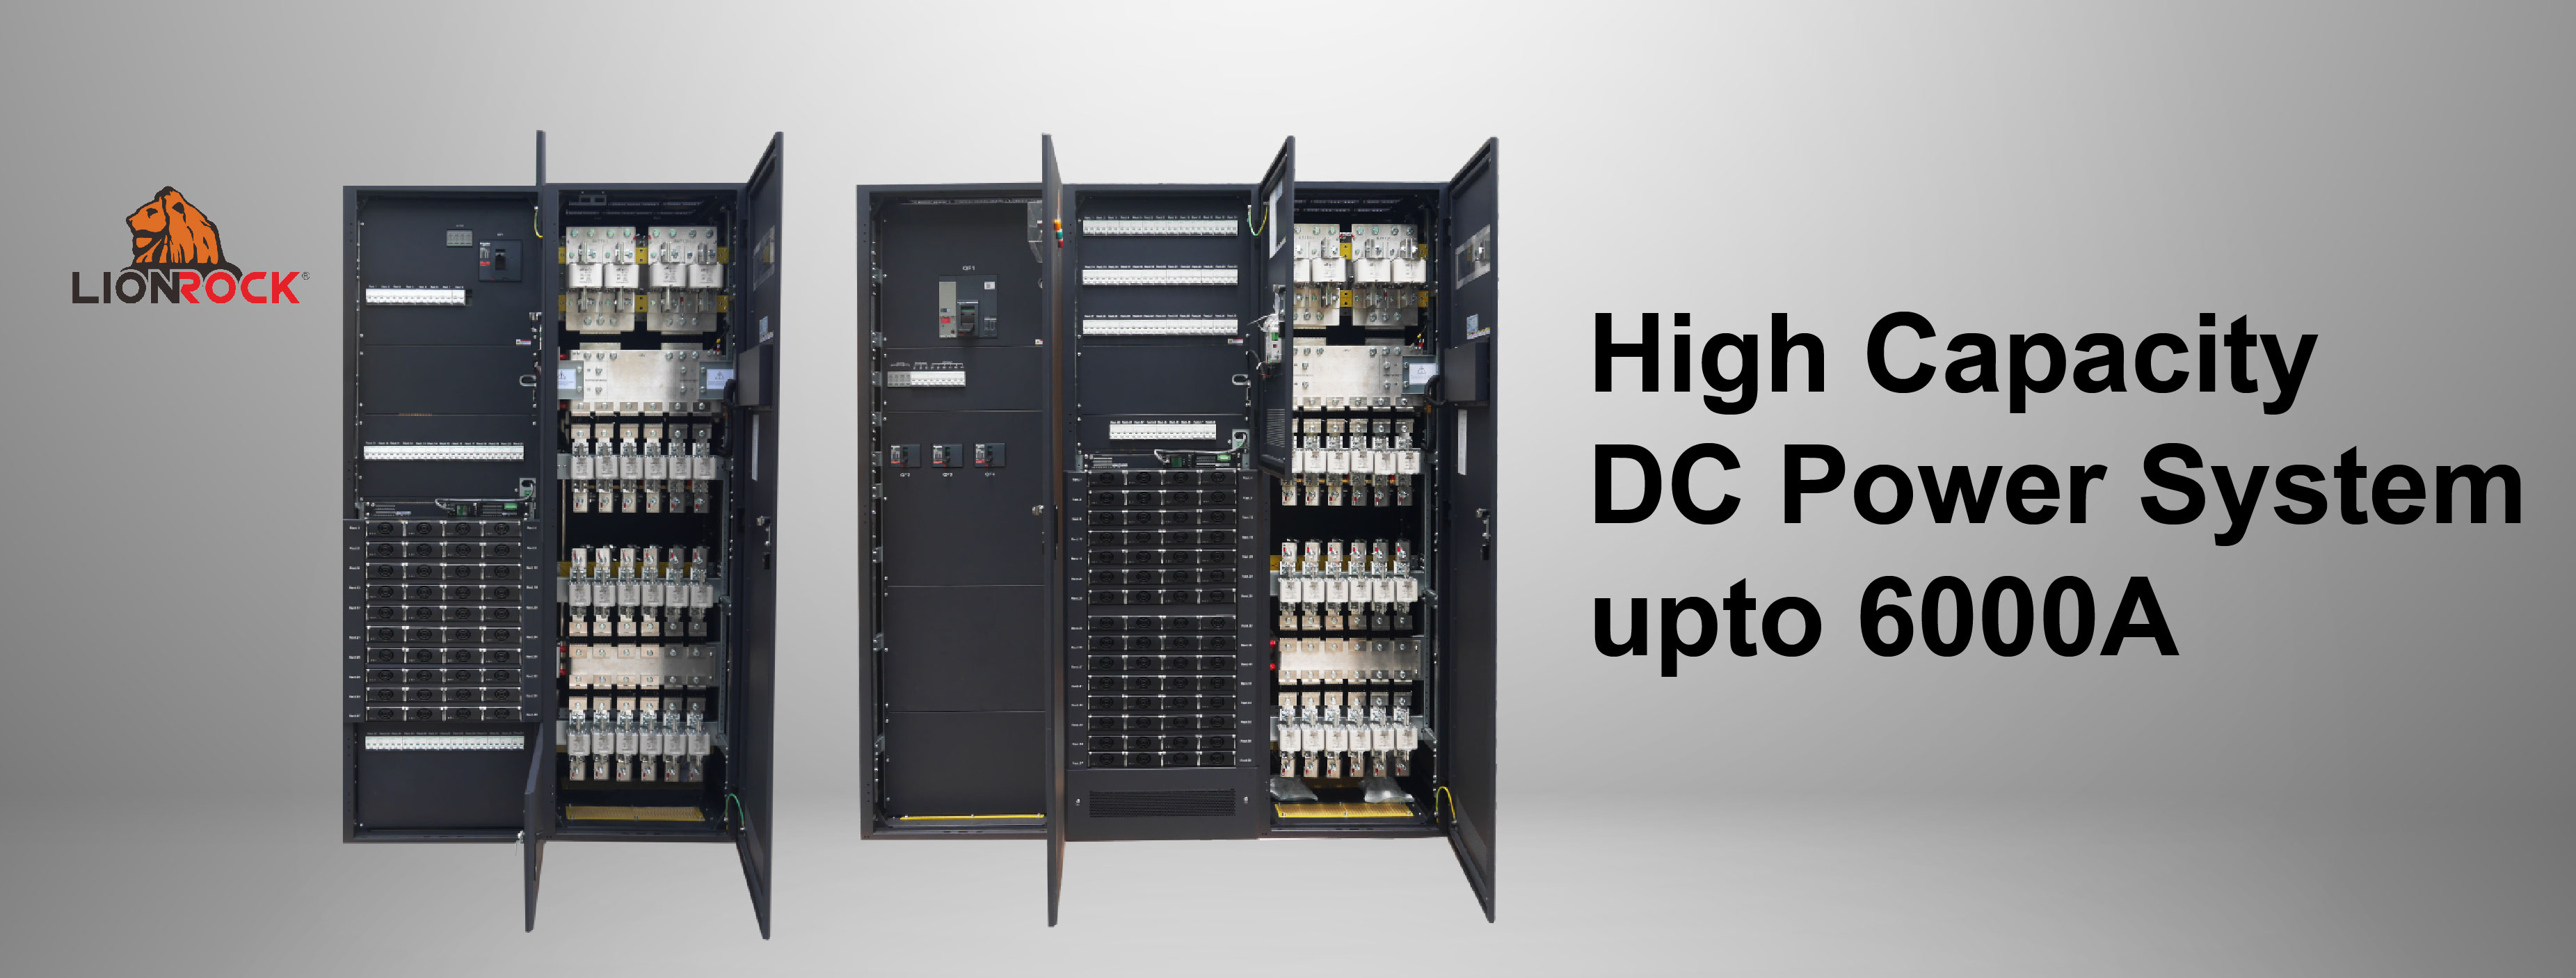 High Capacity DC Power Systems up to 6000A,Product,NEWS,3TECH